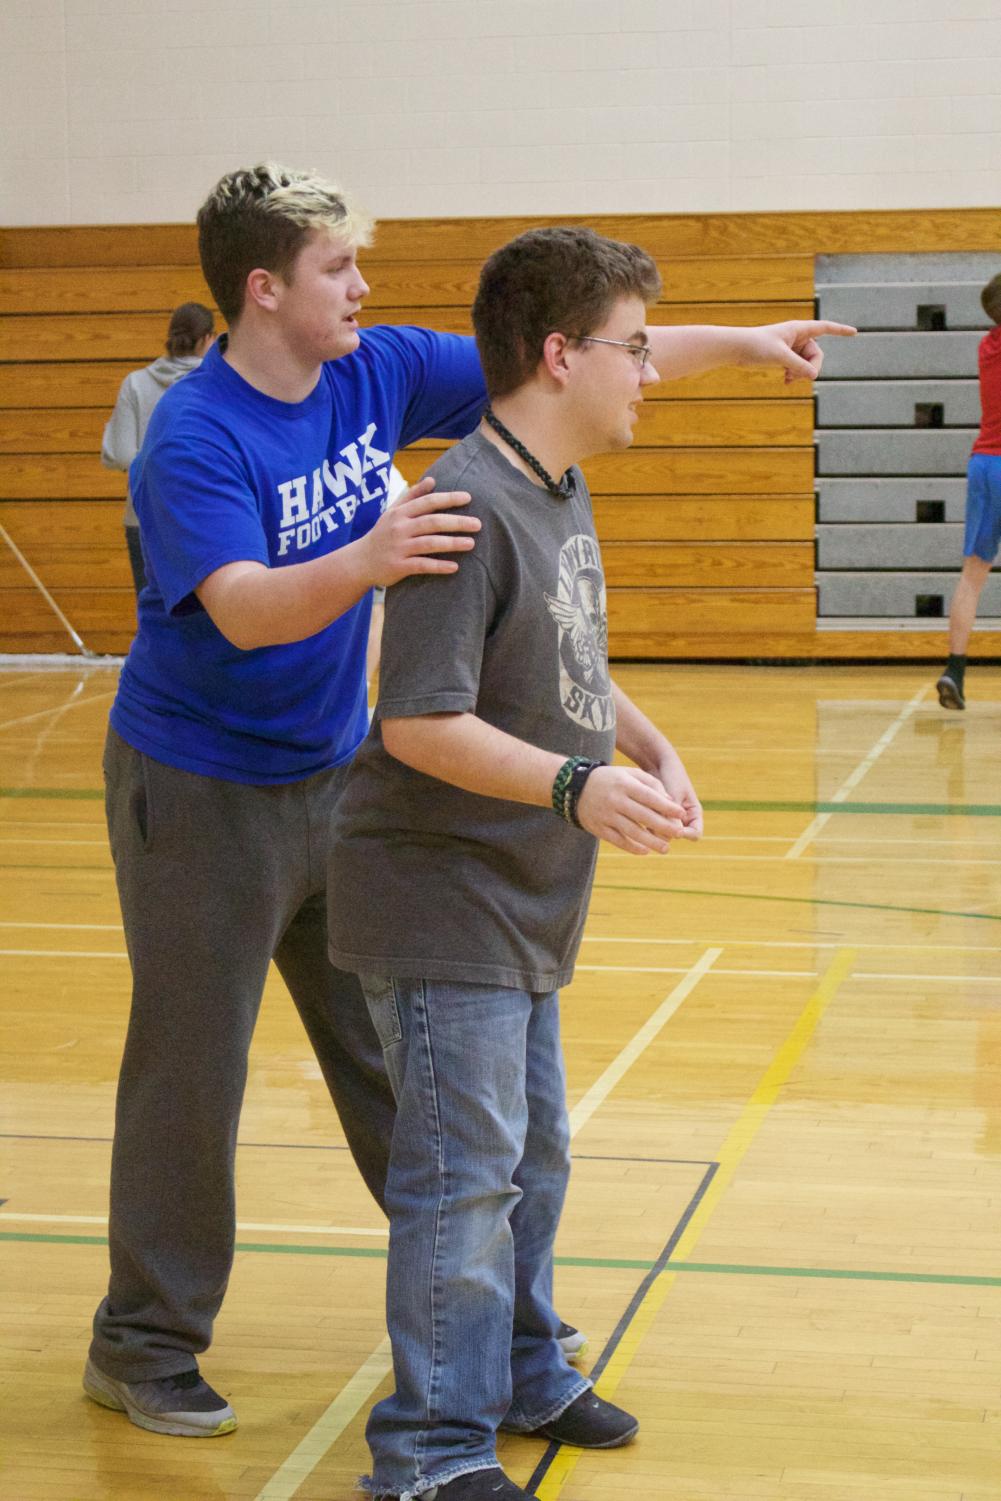 Panther+Pal+basketball+practice+%28photos+by+Kaitlyn+Strobel%29